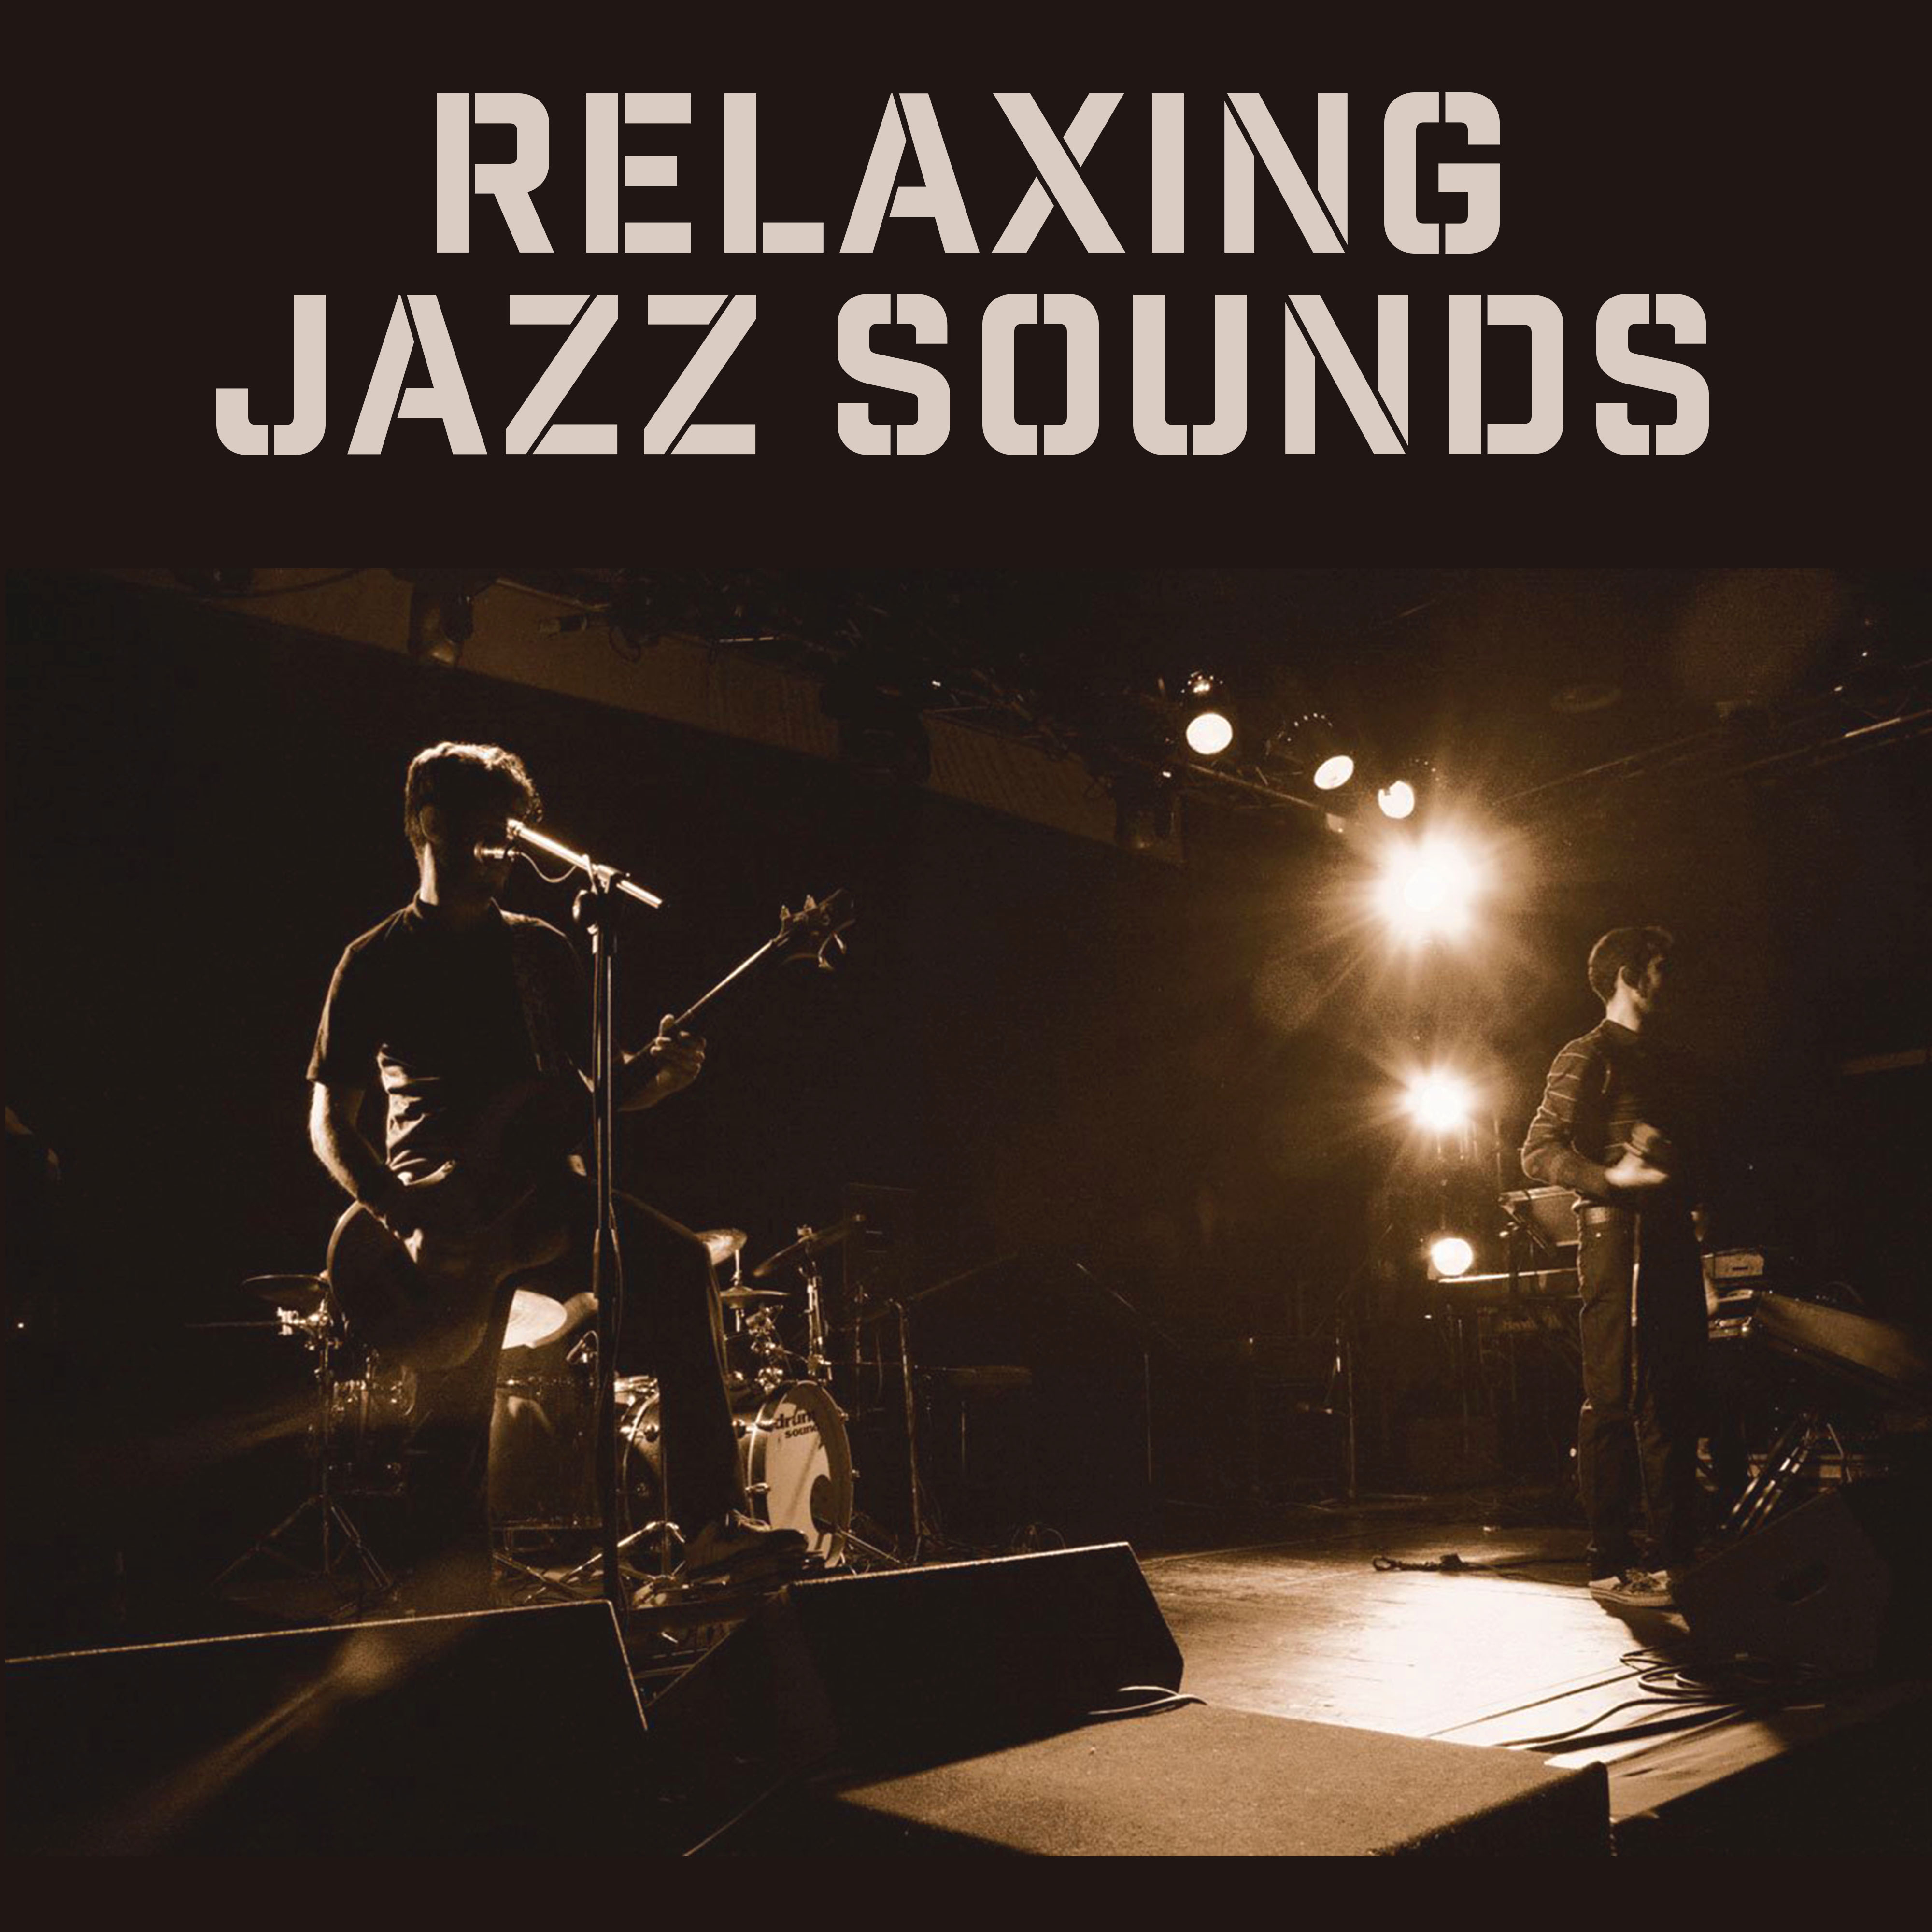 Relaxing Jazz Sounds  Peaceful Music, Jazz to Rest, Mind Calmness, Smooth Sounds